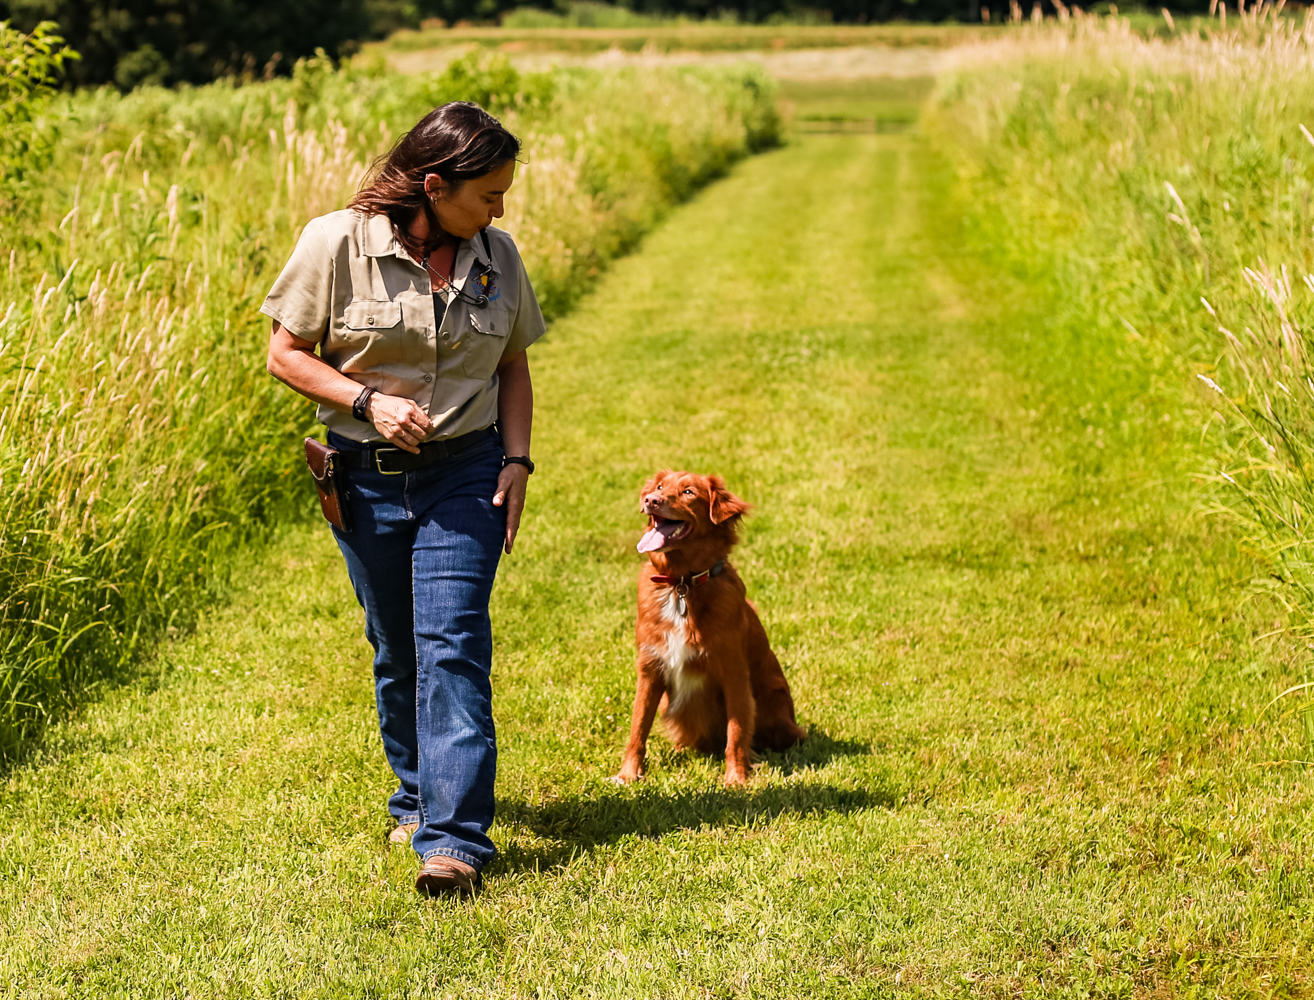 Woman weareing tan shirt and blue jeans trains a dog in an open field for a branding photography session